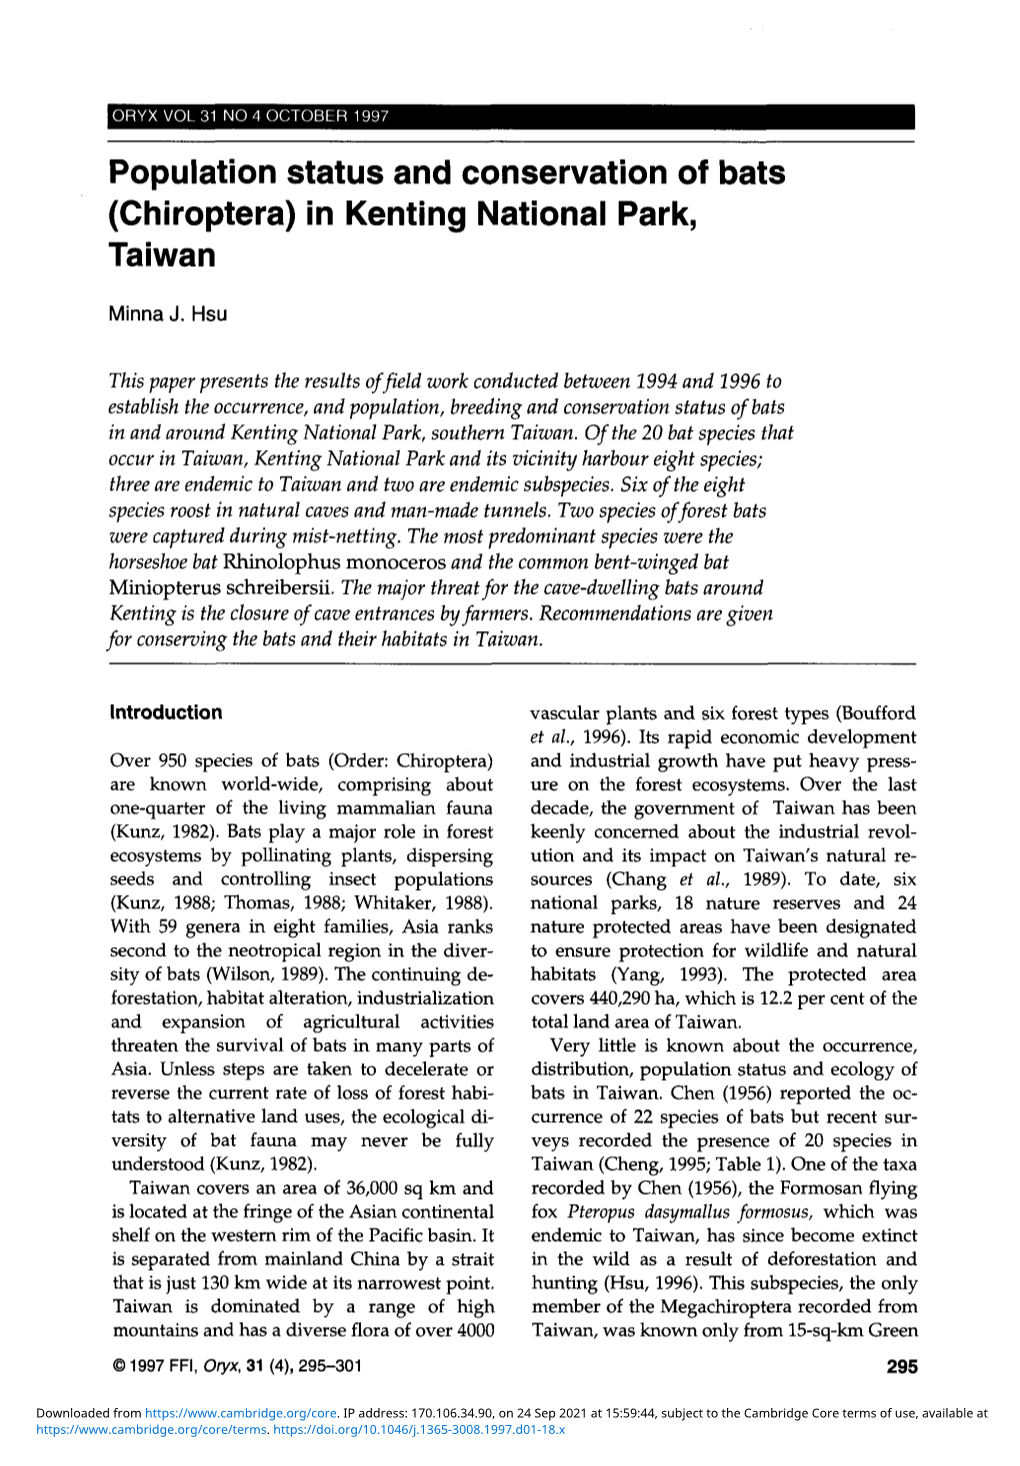 Population Status and Conservation of Bats (Chiroptera) in Kenting National Park, Taiwan